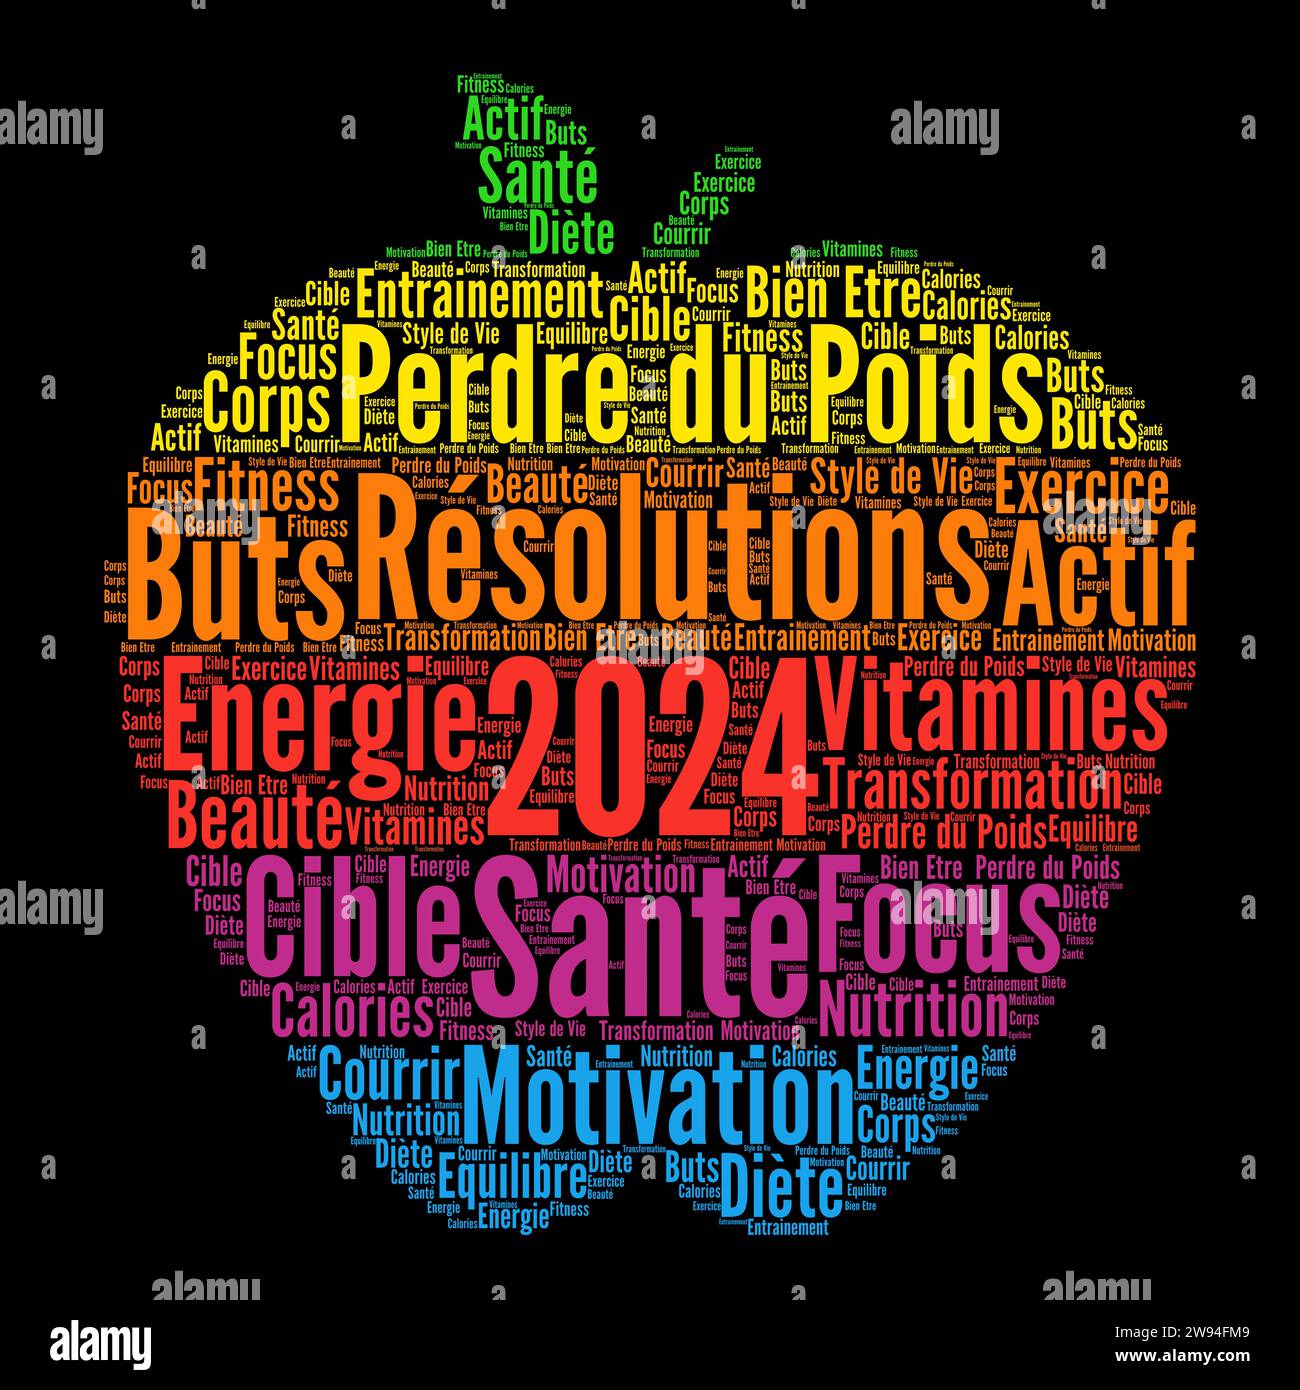 Healthy Resolutions 2024 Word Cloud In French Language 2W94FM9 